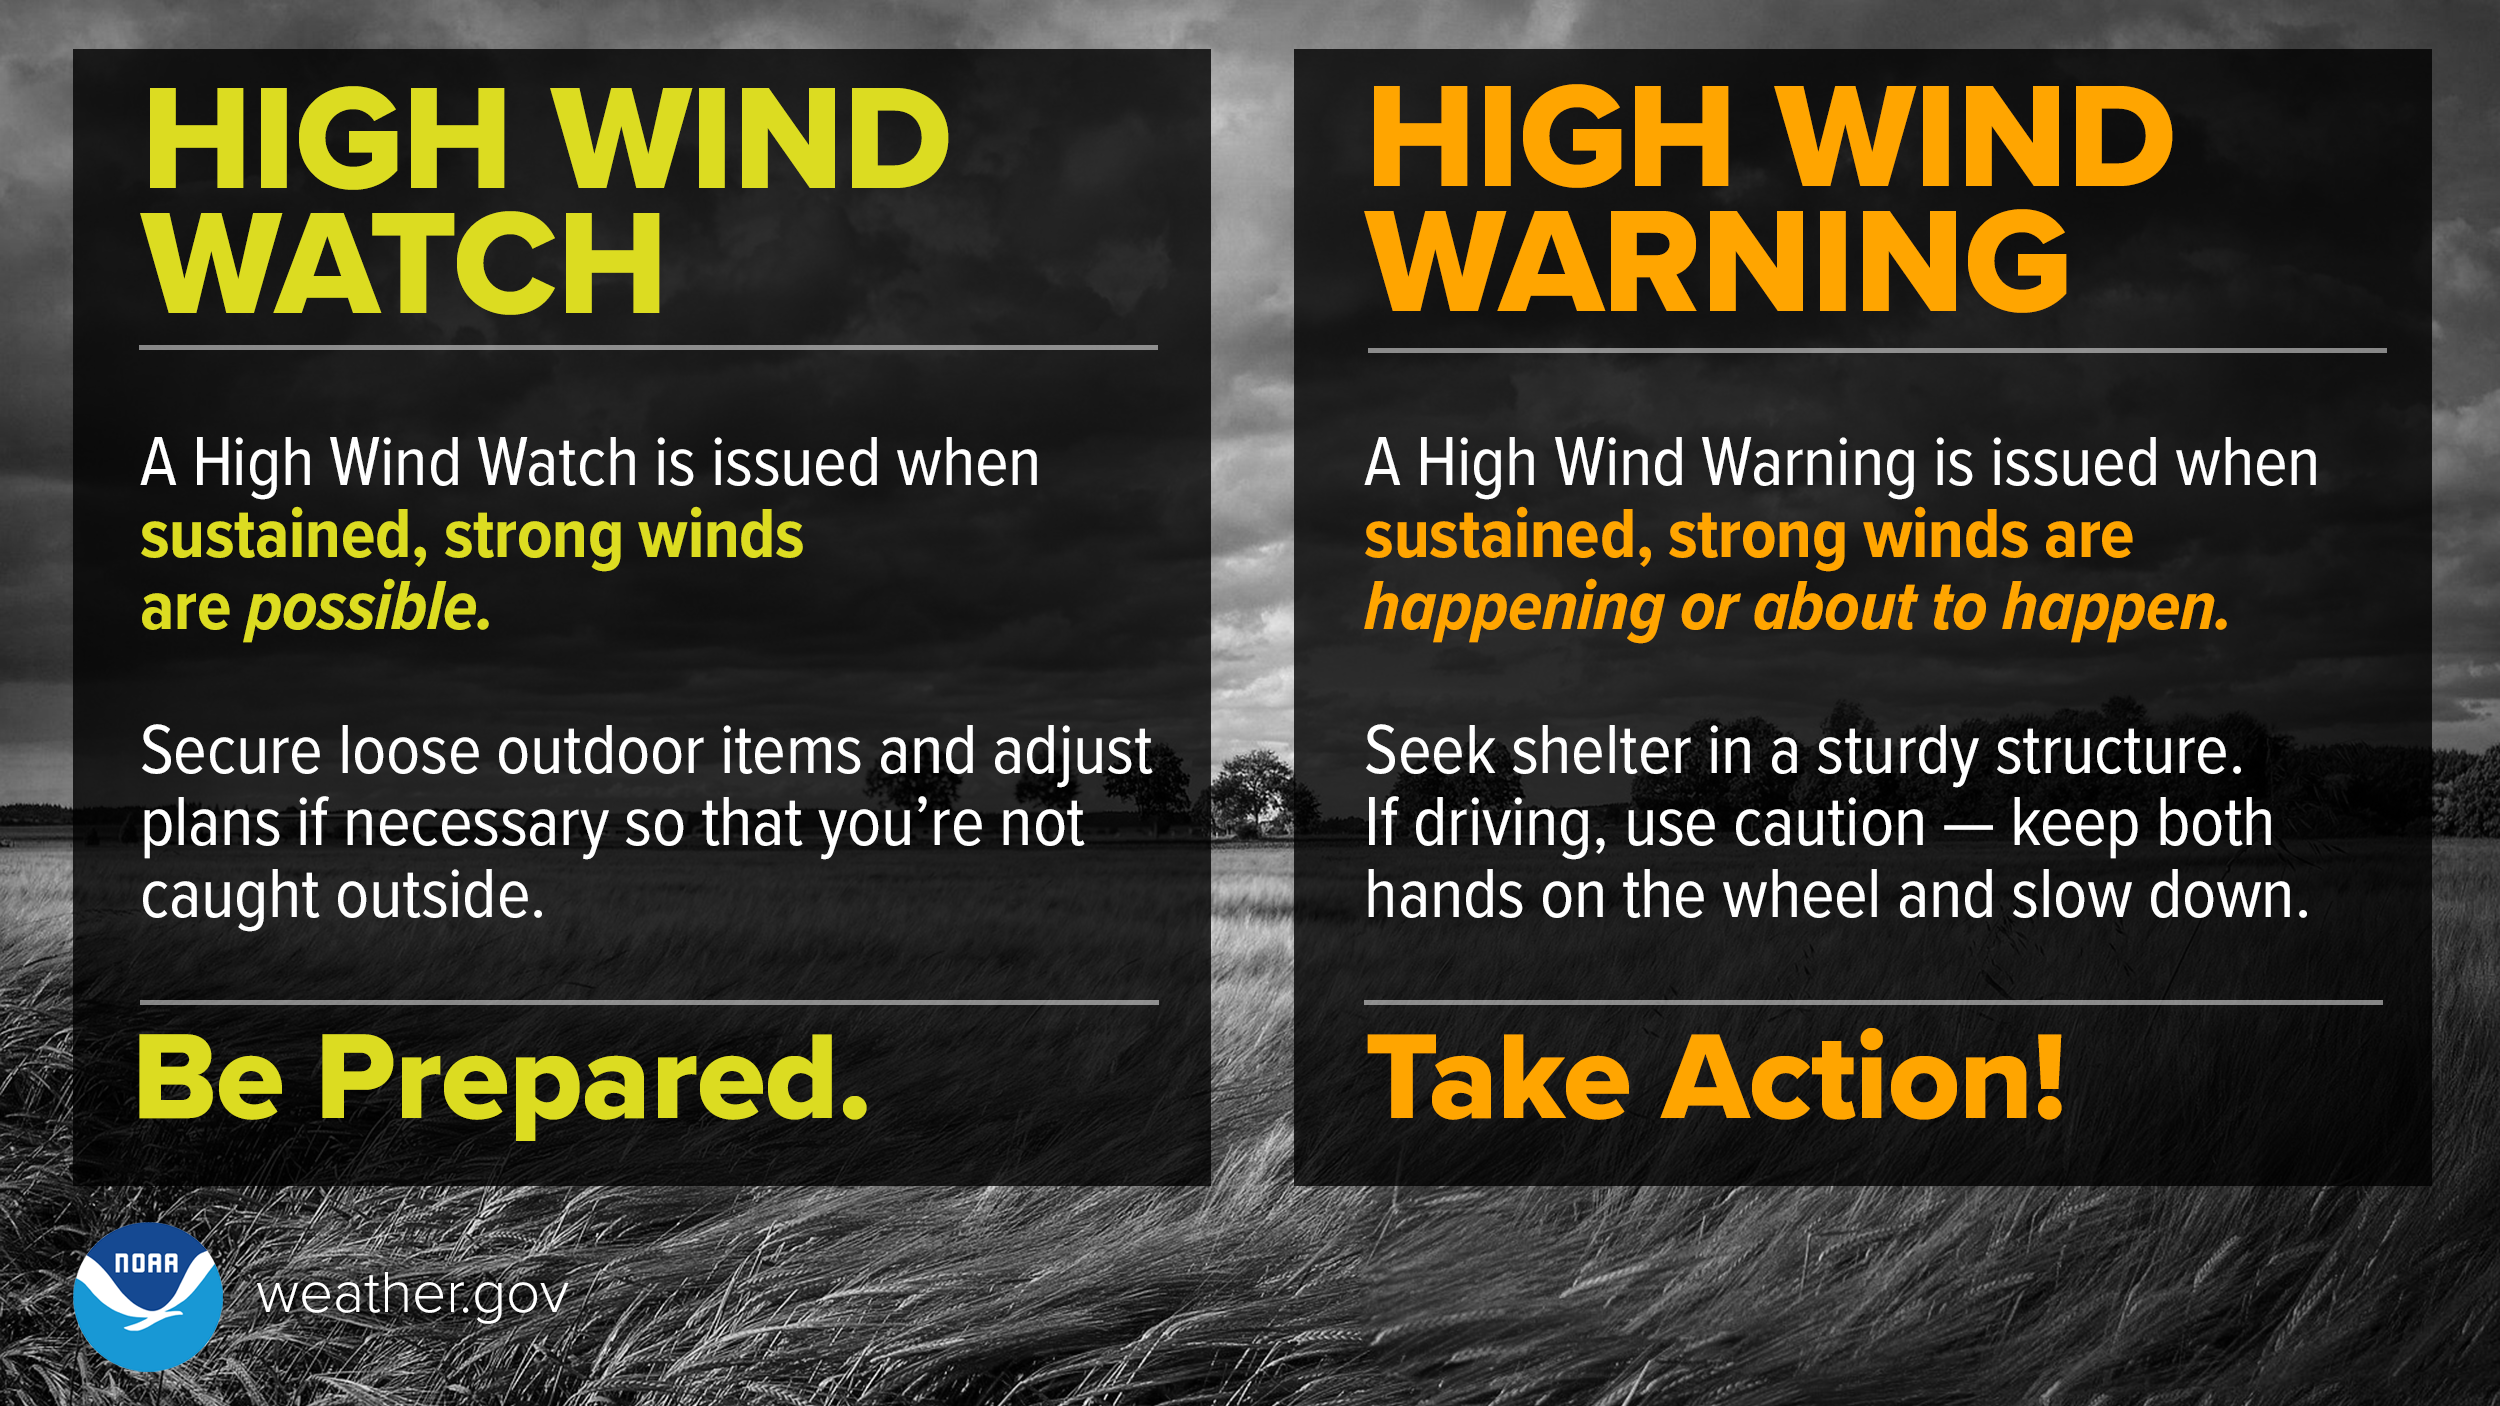 High Wind Watch means be prepared. A High Wind Watch is issued when sustained, strong winds are possible. Secure loose outdoor items and adjust plans if necessary so that you're not caught outside. High Win Warning means take action! A High Wind Warning is issued when sustained, strong winds are happening or about to happen. Seek shelter in a sturdy structure. If driving, use caution - keep both hands on the wheel and slow down.